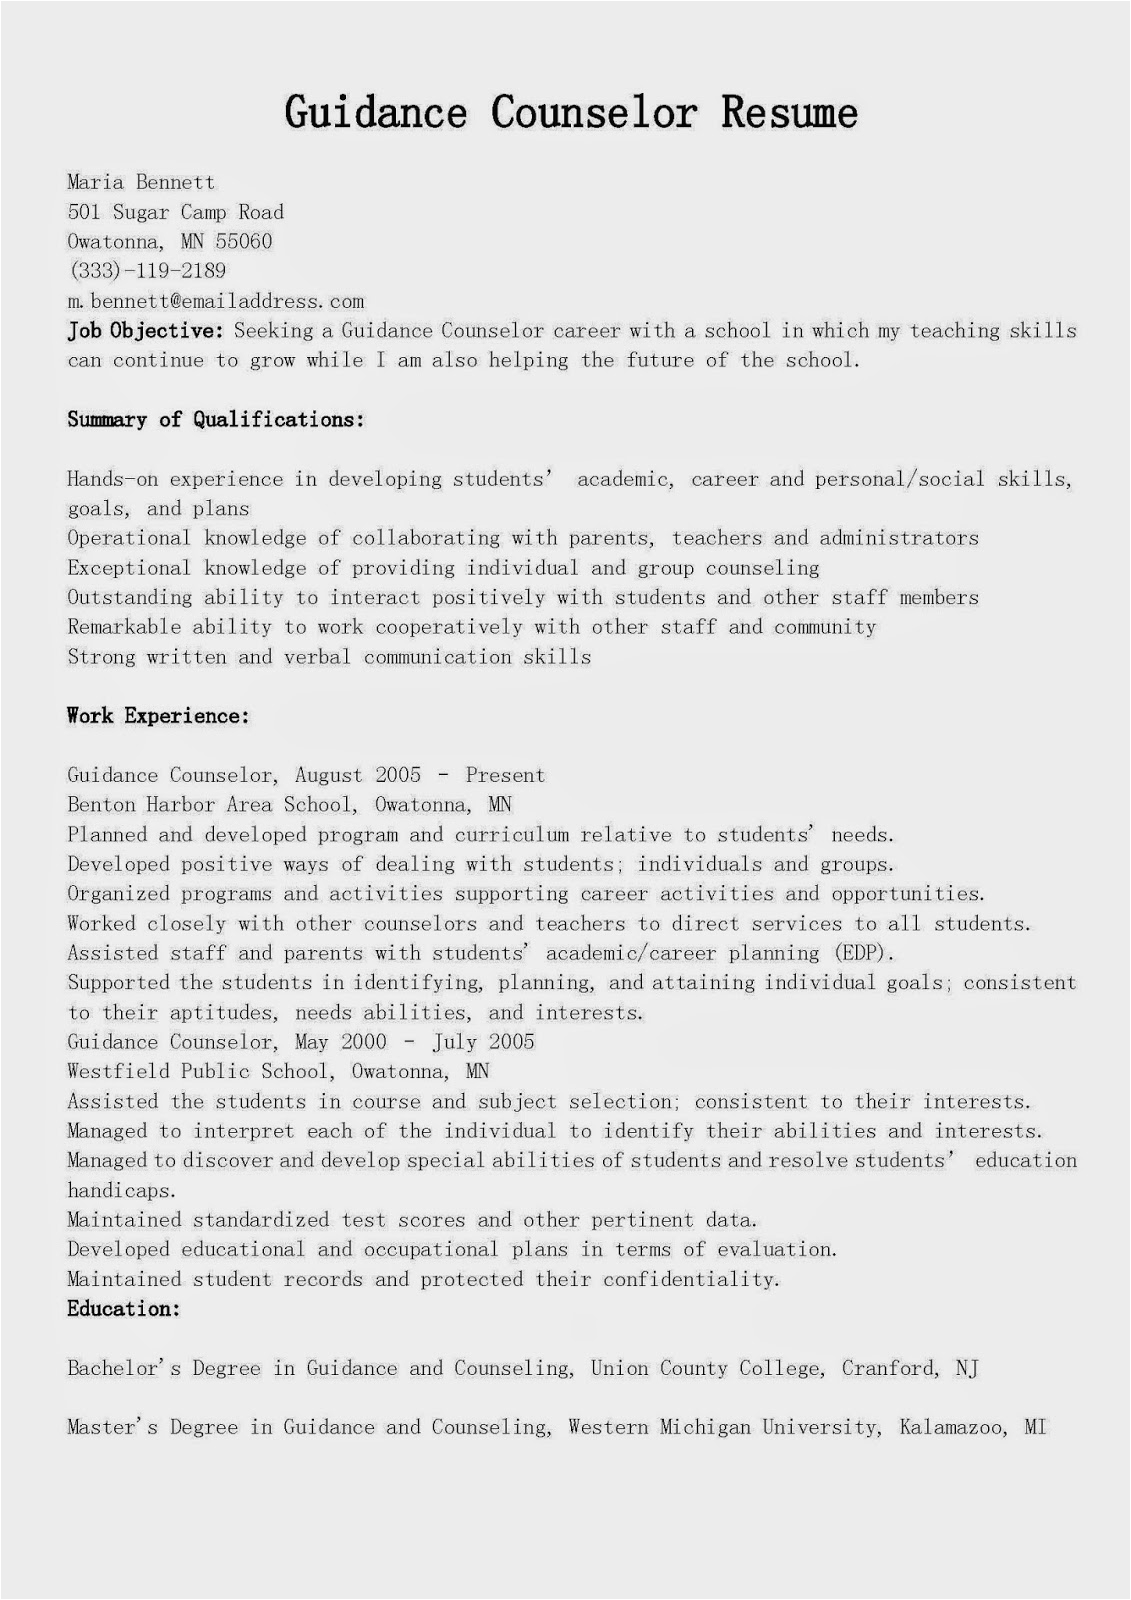 Sample Resume for School Counselor Position Resume Samples Guidance Counselor Resume Sample